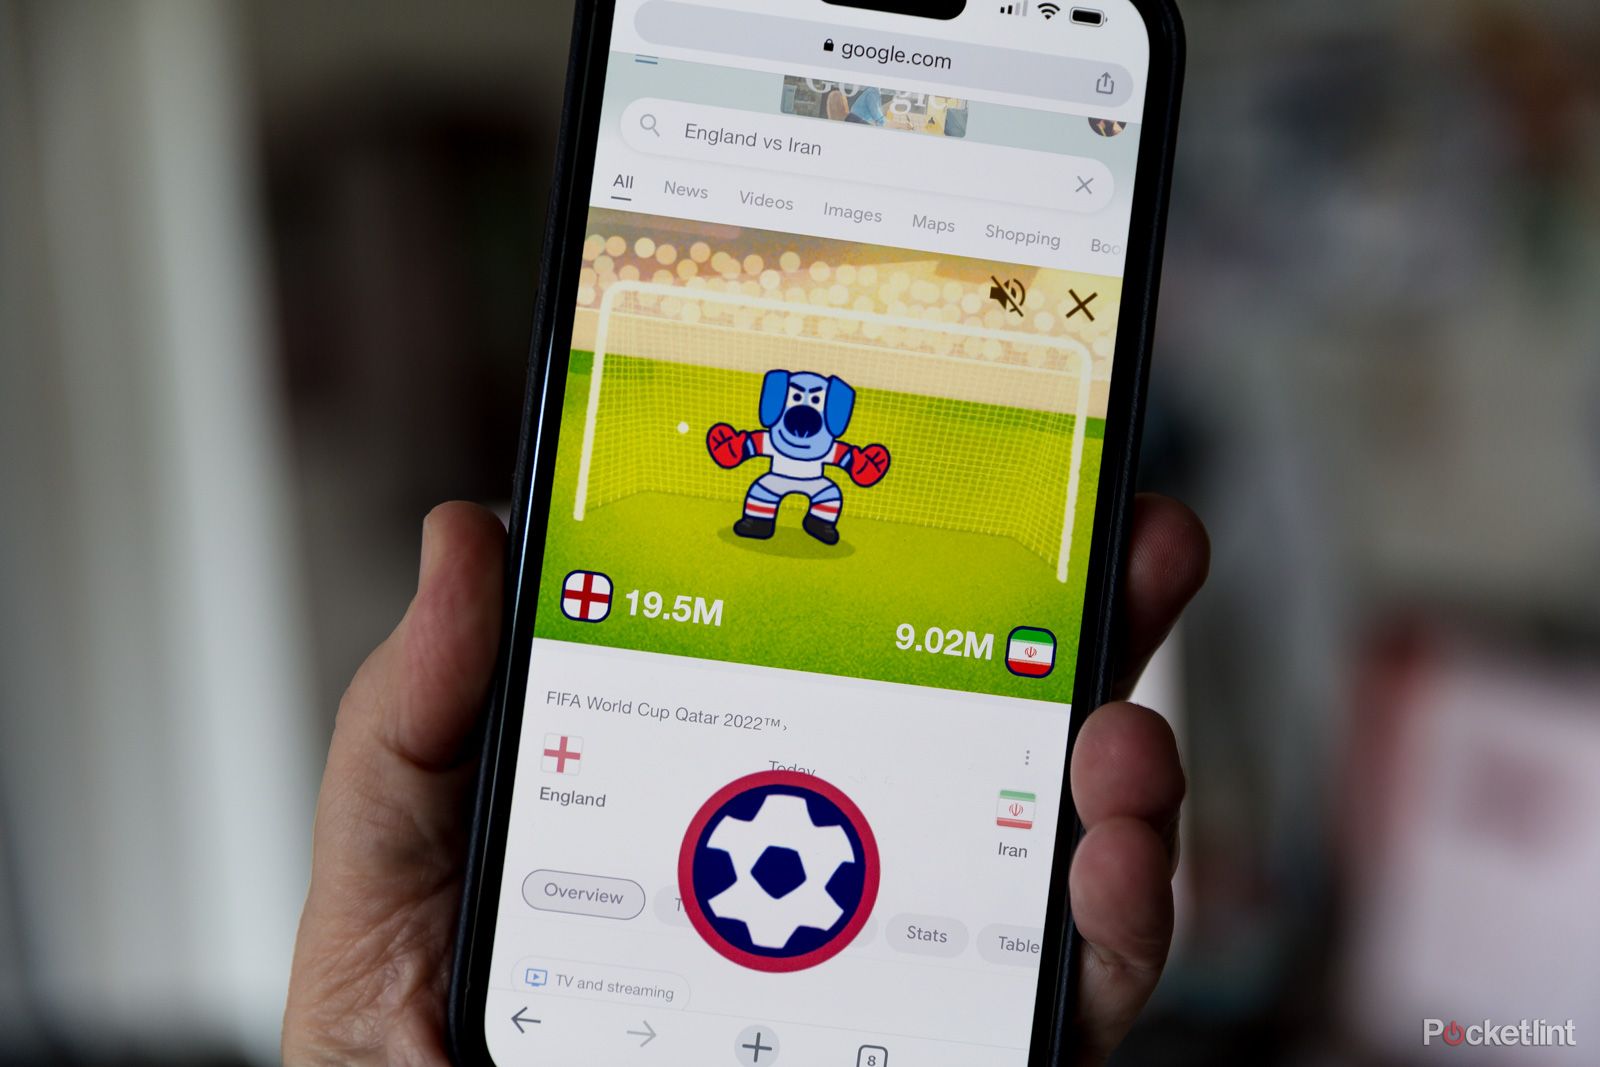 How to play Google's World Cup Mini Game photo 1